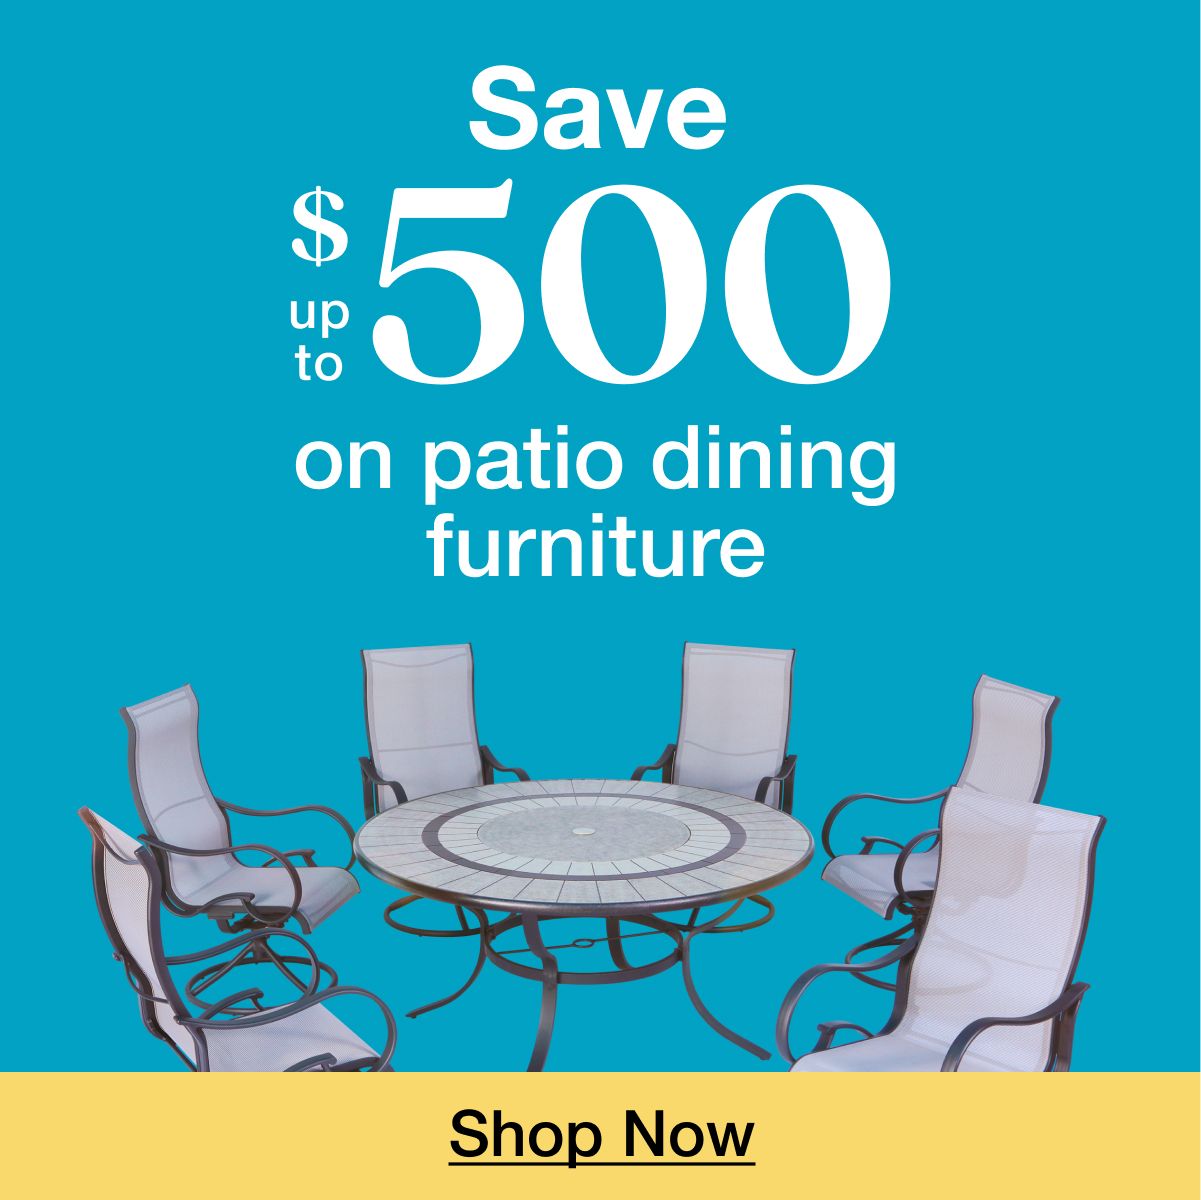 Save up to $500 on Patio Dining Furniture. Click to shop now